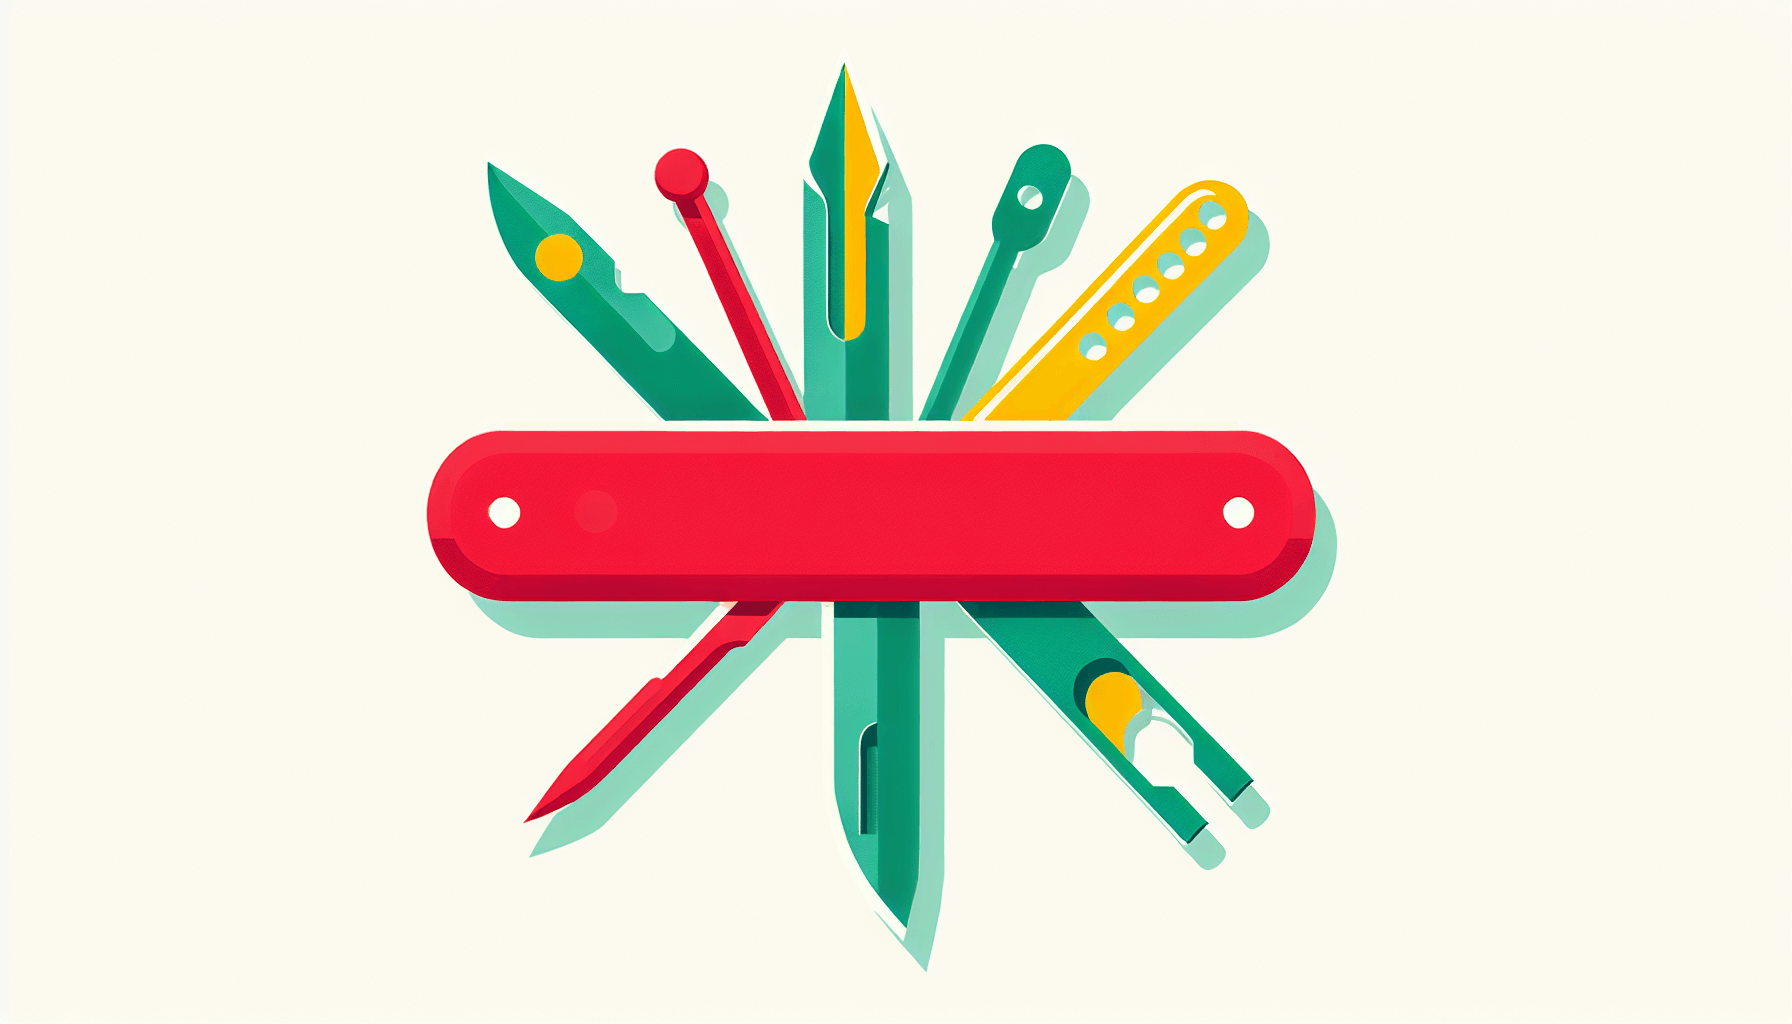 Swiss knife in flat illustration style and white background, red #f47574, green #88c7a8, yellow #fcc44b, and blue #645bc8 colors.